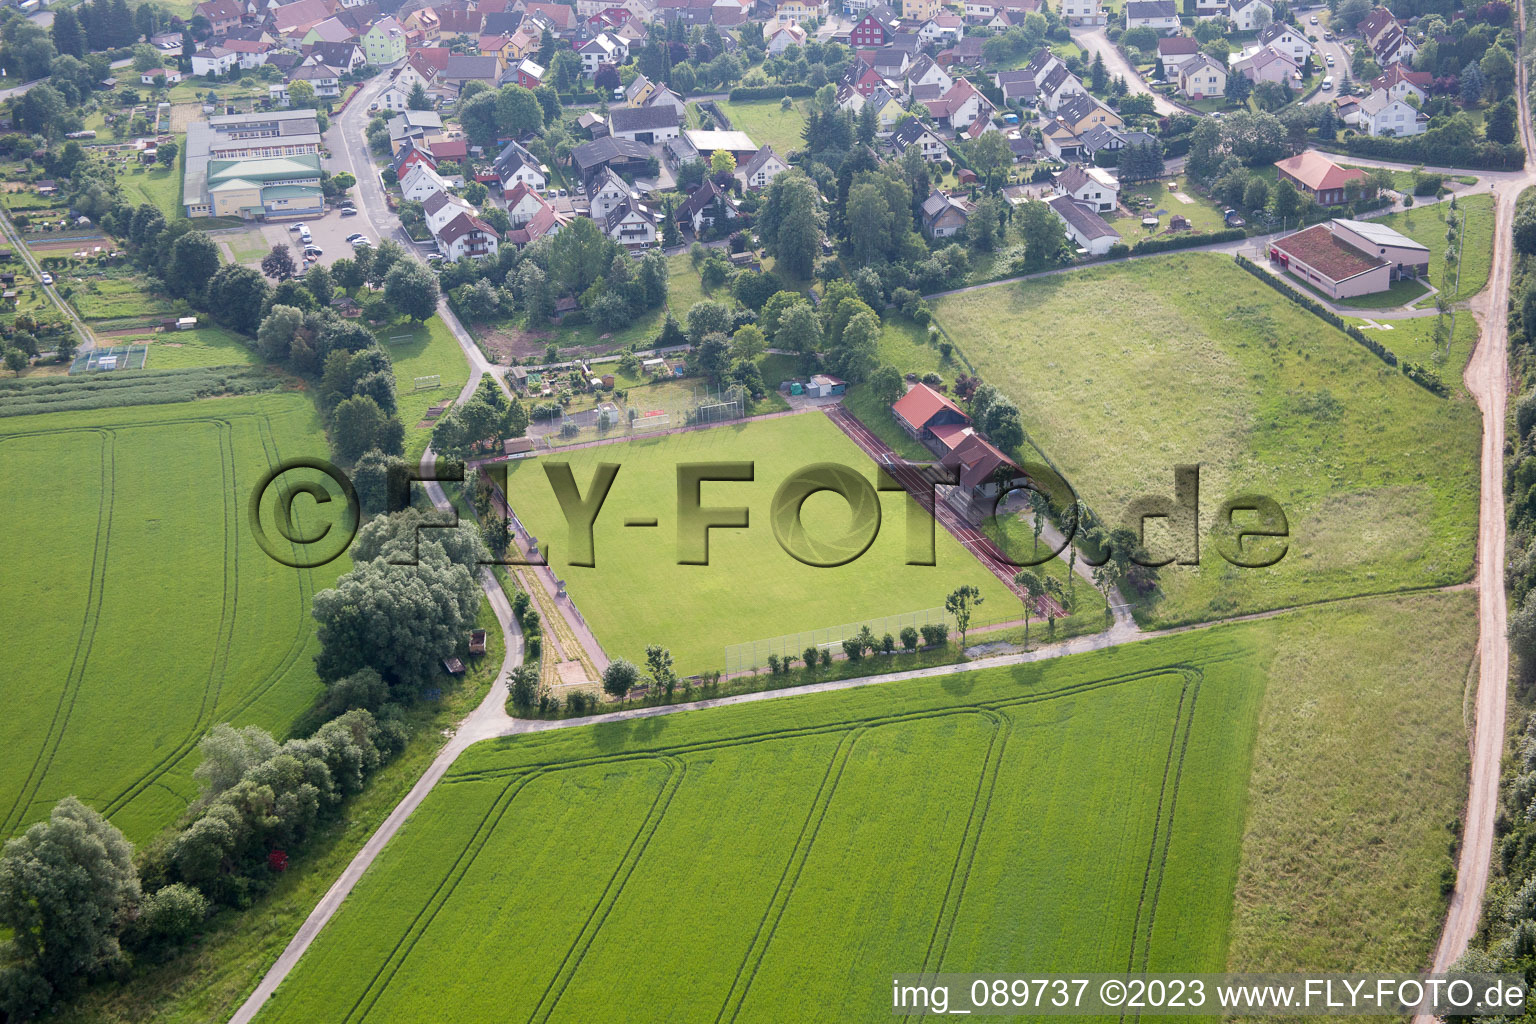 Aerial photograpy of Dertingen in the state Baden-Wuerttemberg, Germany